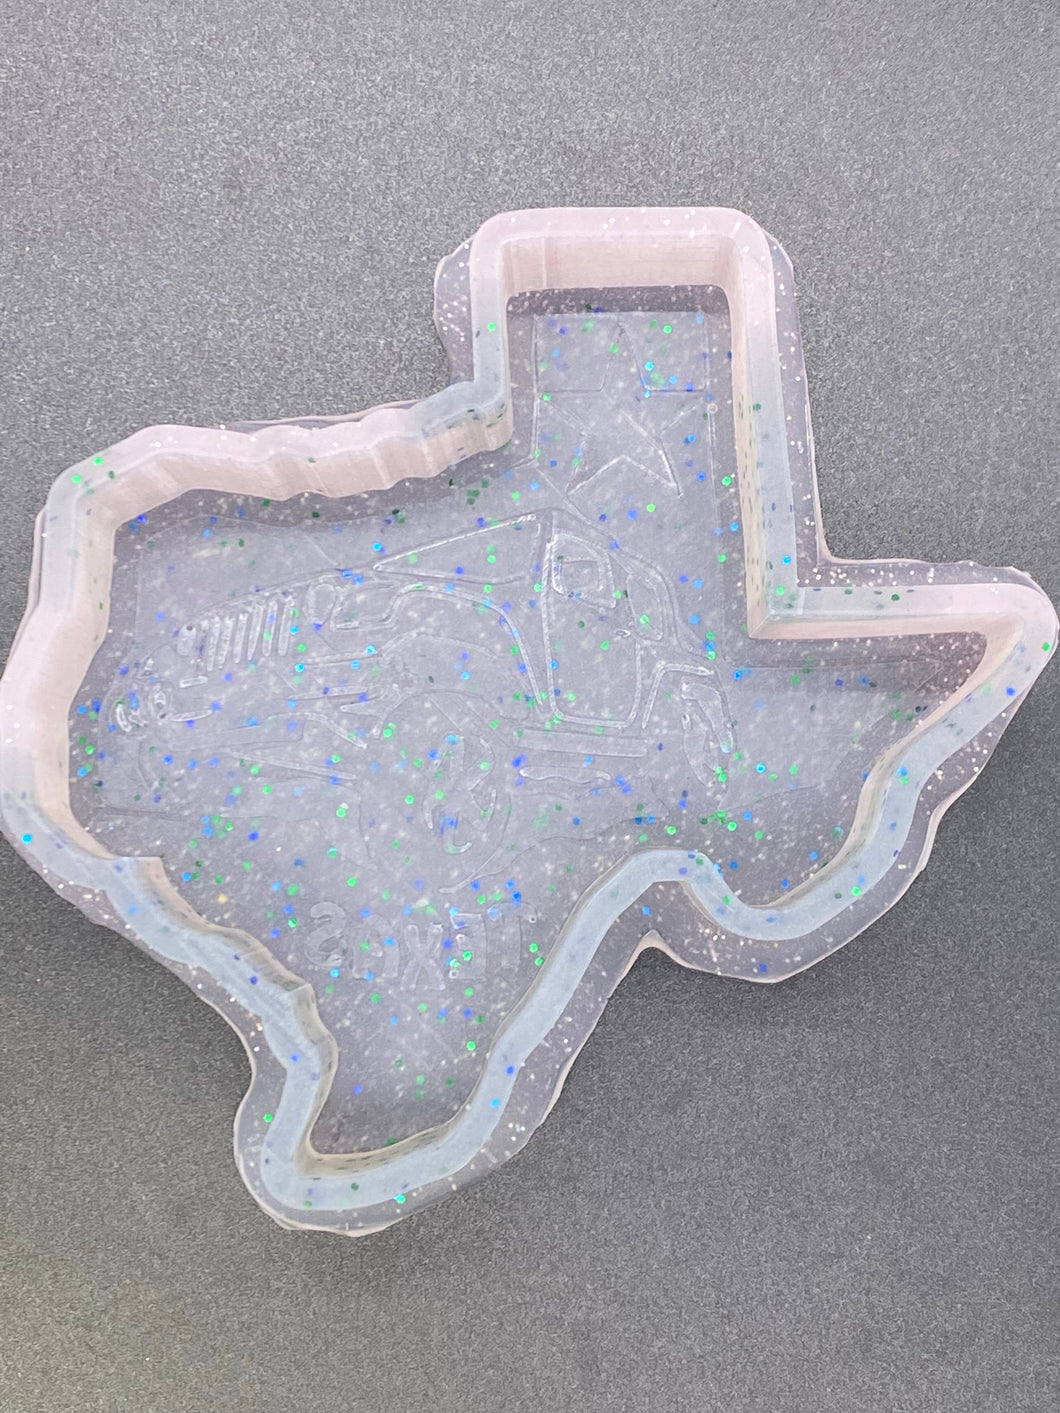 Off-Road Texas Silicone Mold  5” W x 5” T x 1